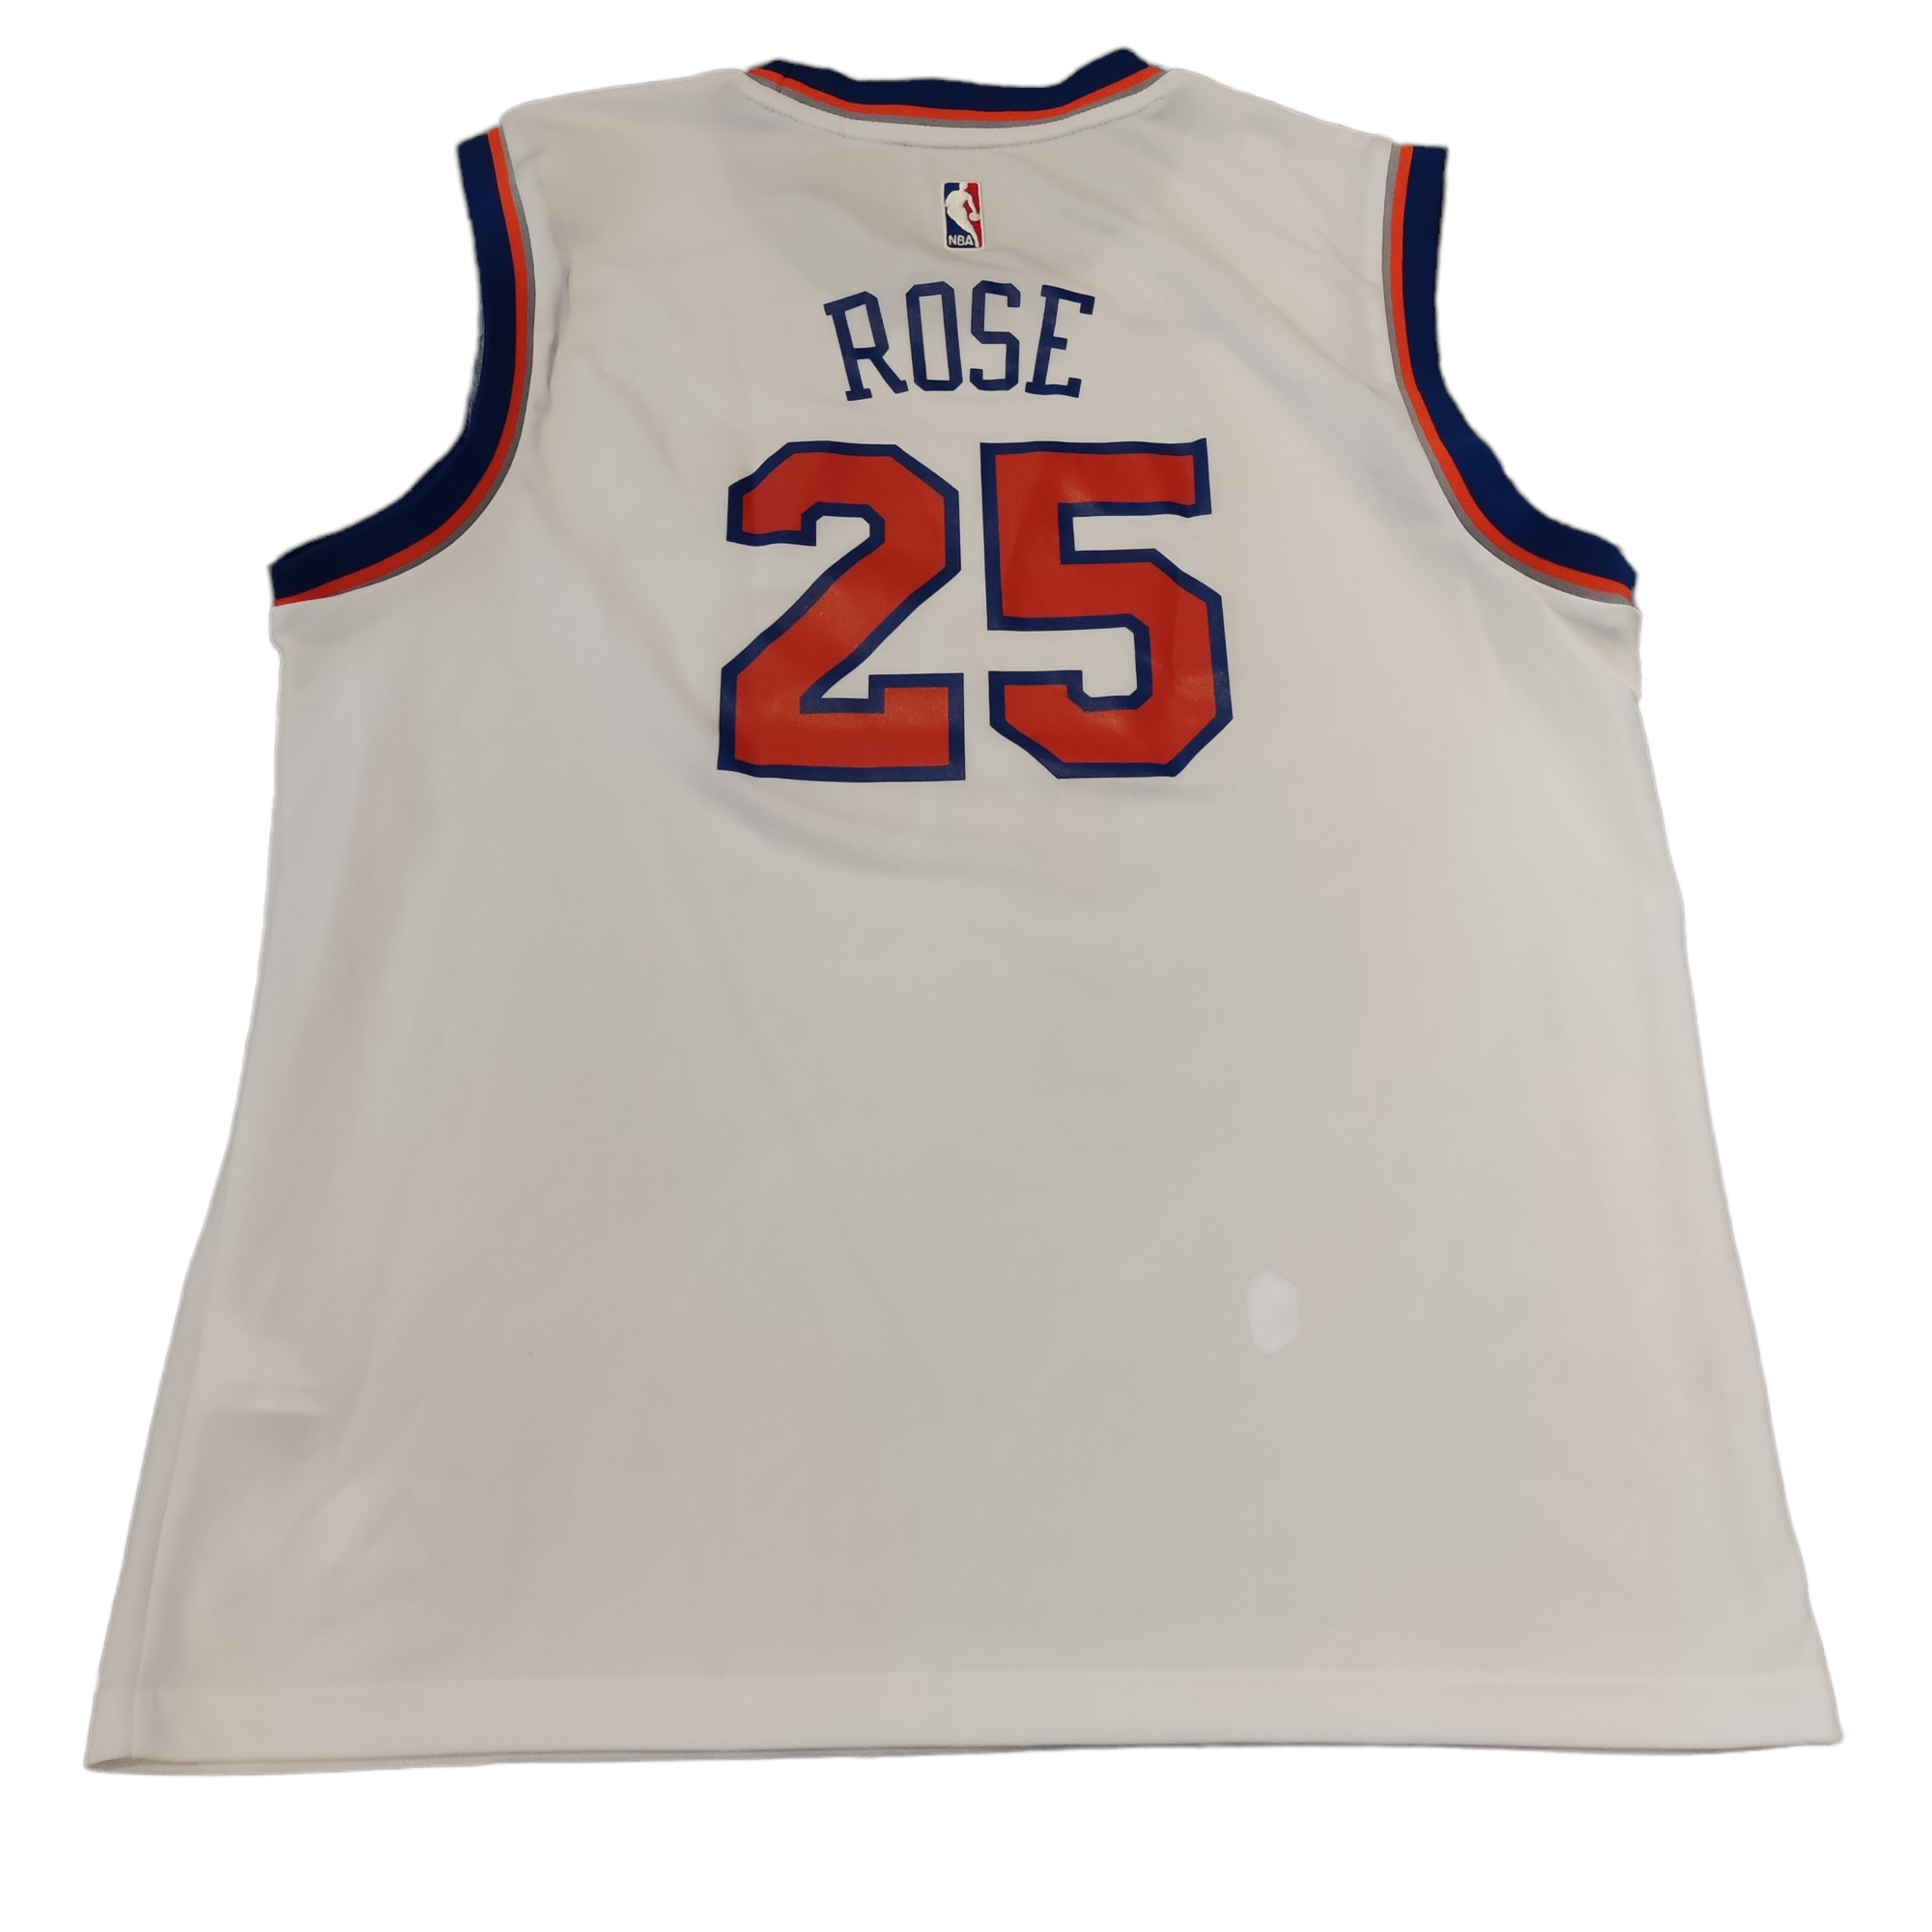 Adidas NBA Jersey. New York Knicks. #25 Derrick Rose (2016) *Pre-Owned fMcFly Sneakers